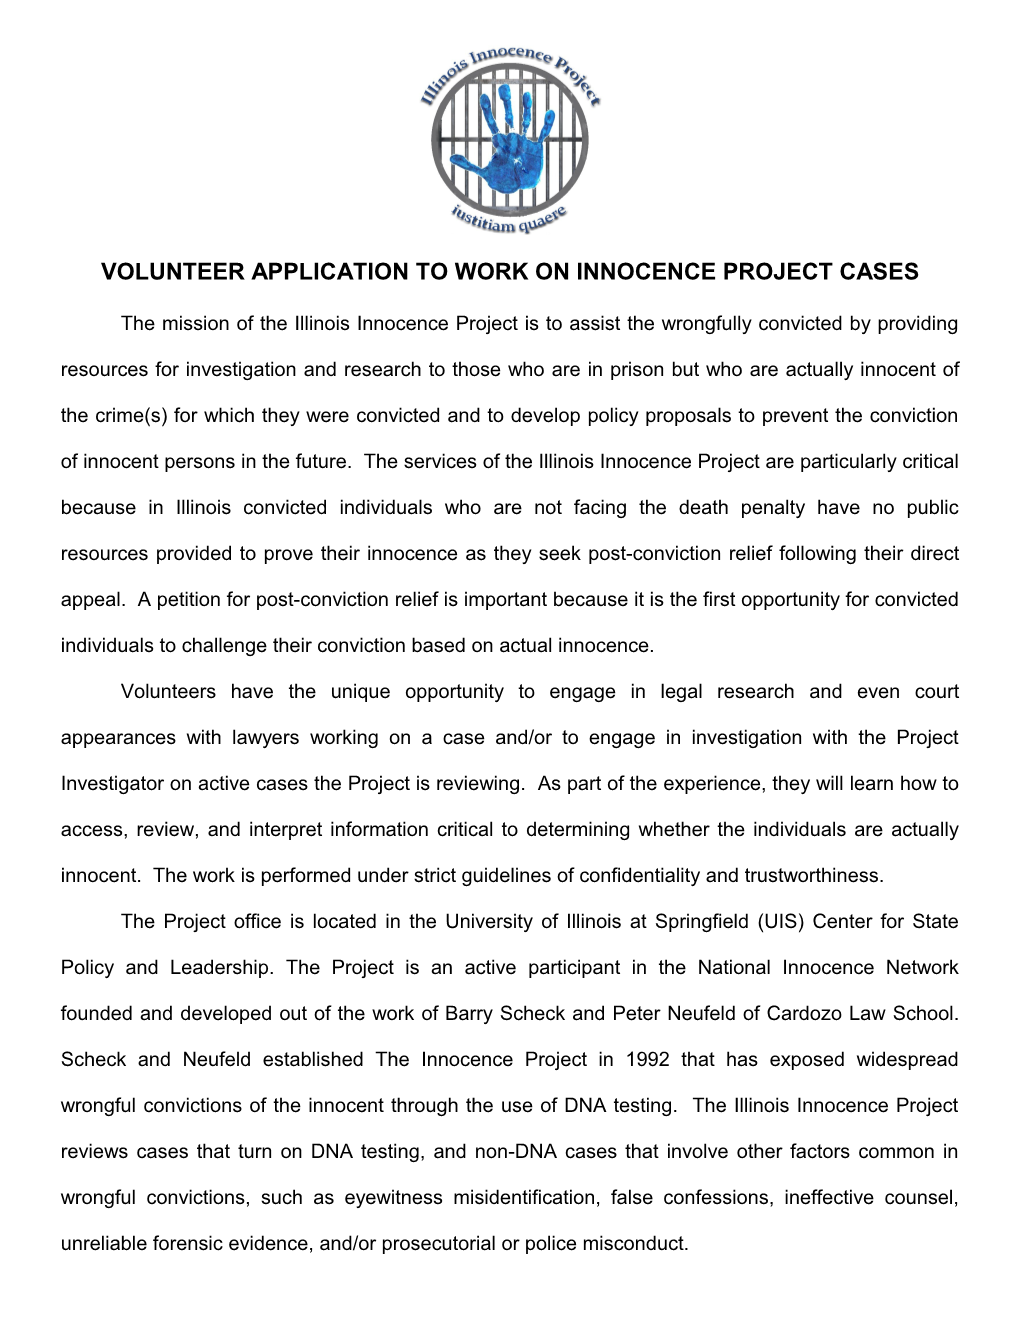 Application to Work on Innocence Project Cases